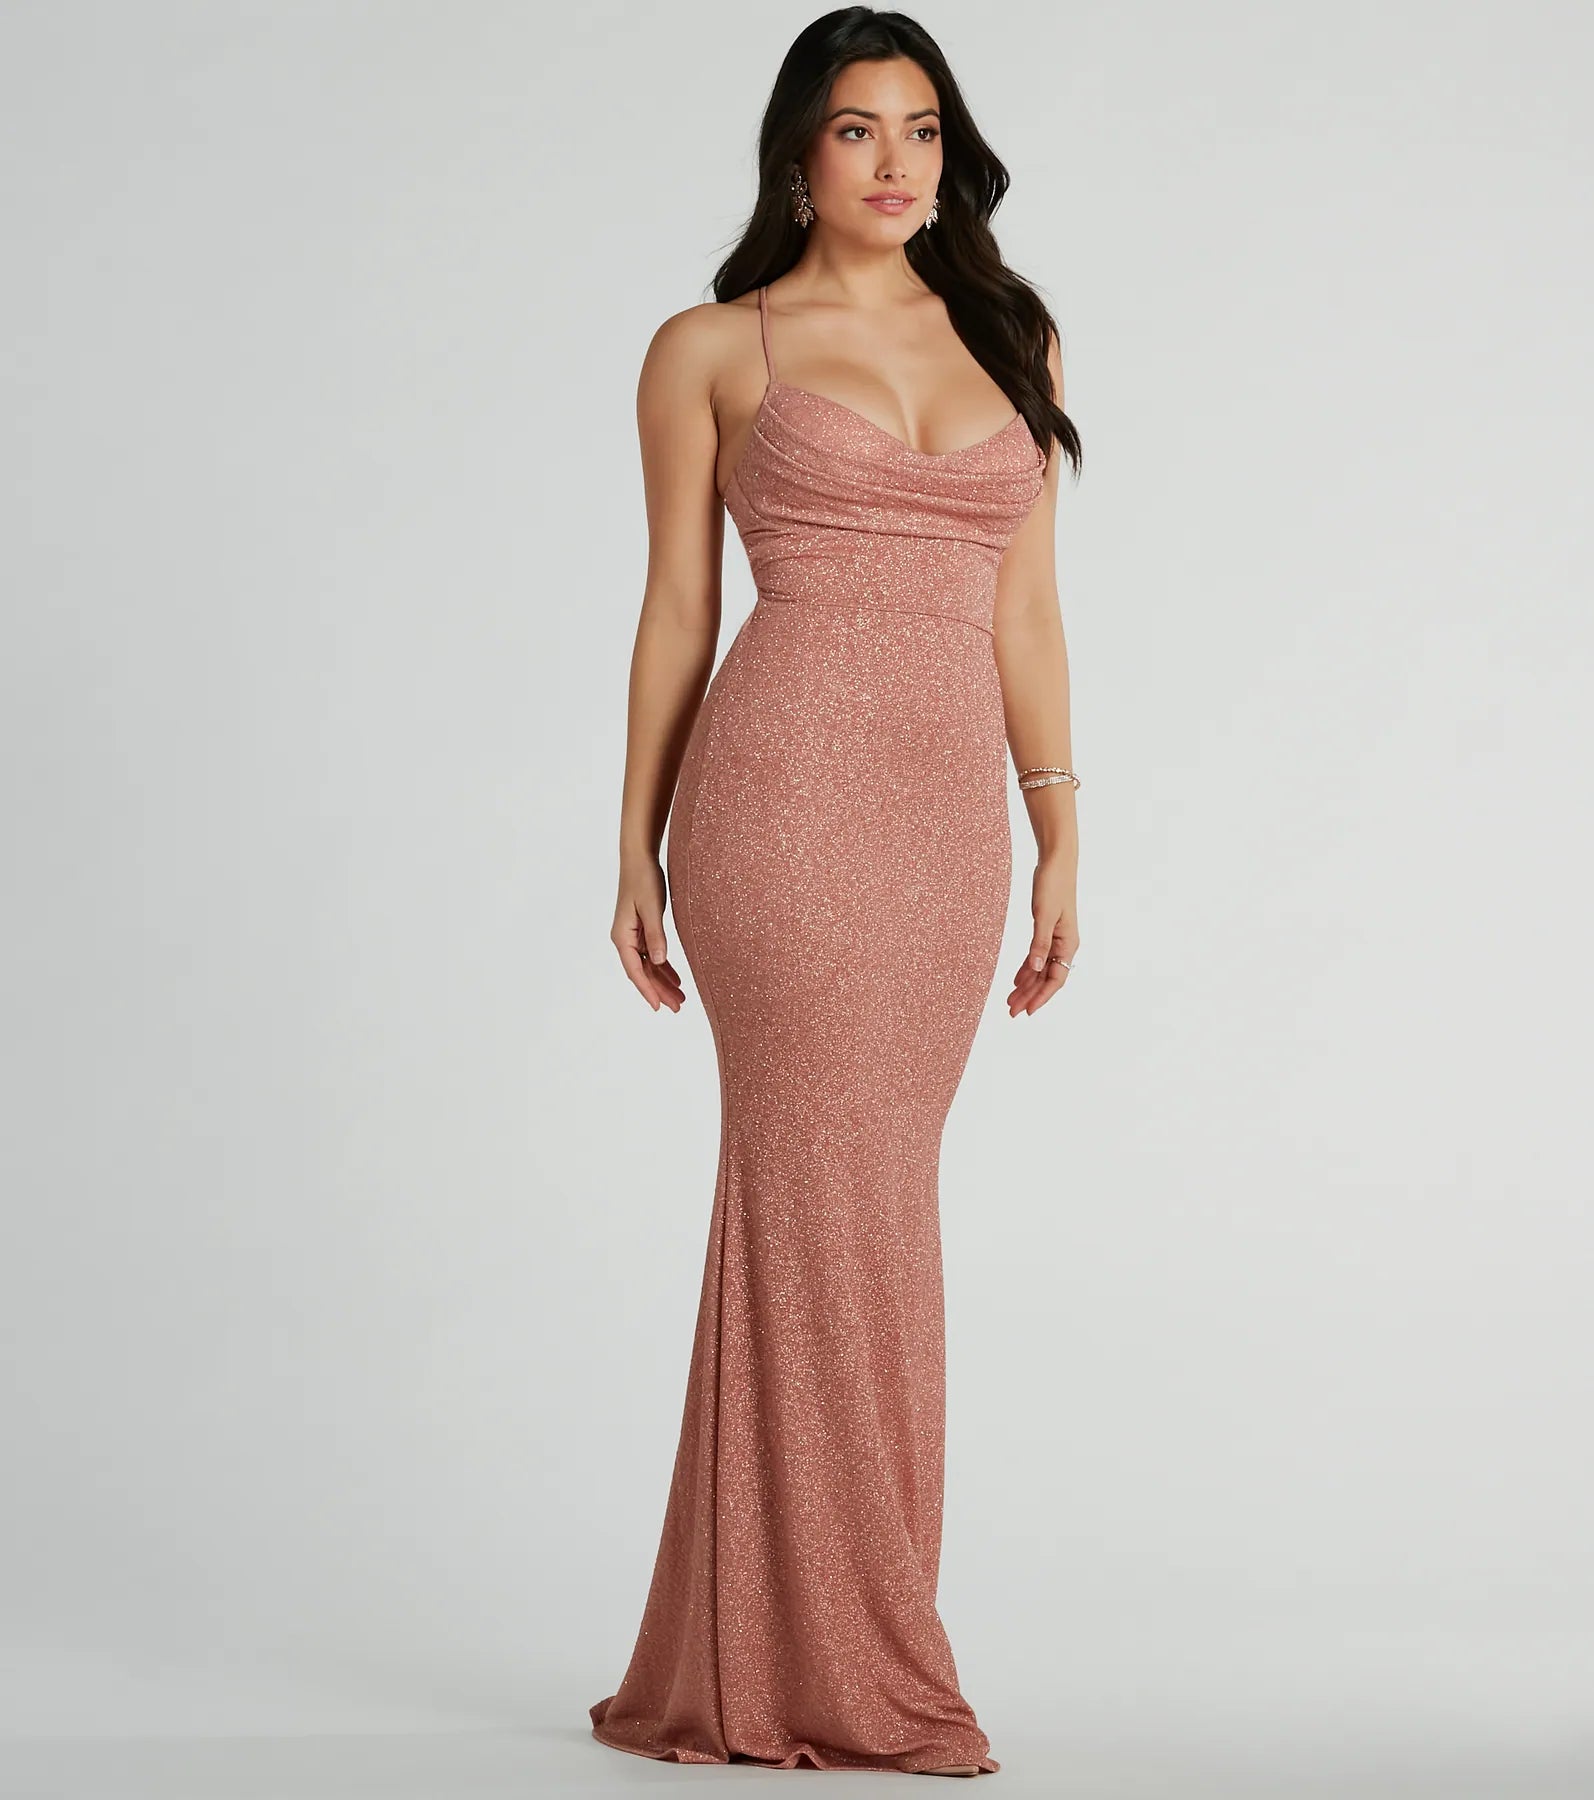 Sophisticated Knit Floor Length Stretchy Glittering Lace-Up Cowl Neck Mermaid Spaghetti Strap Prom Dress/Party Dress